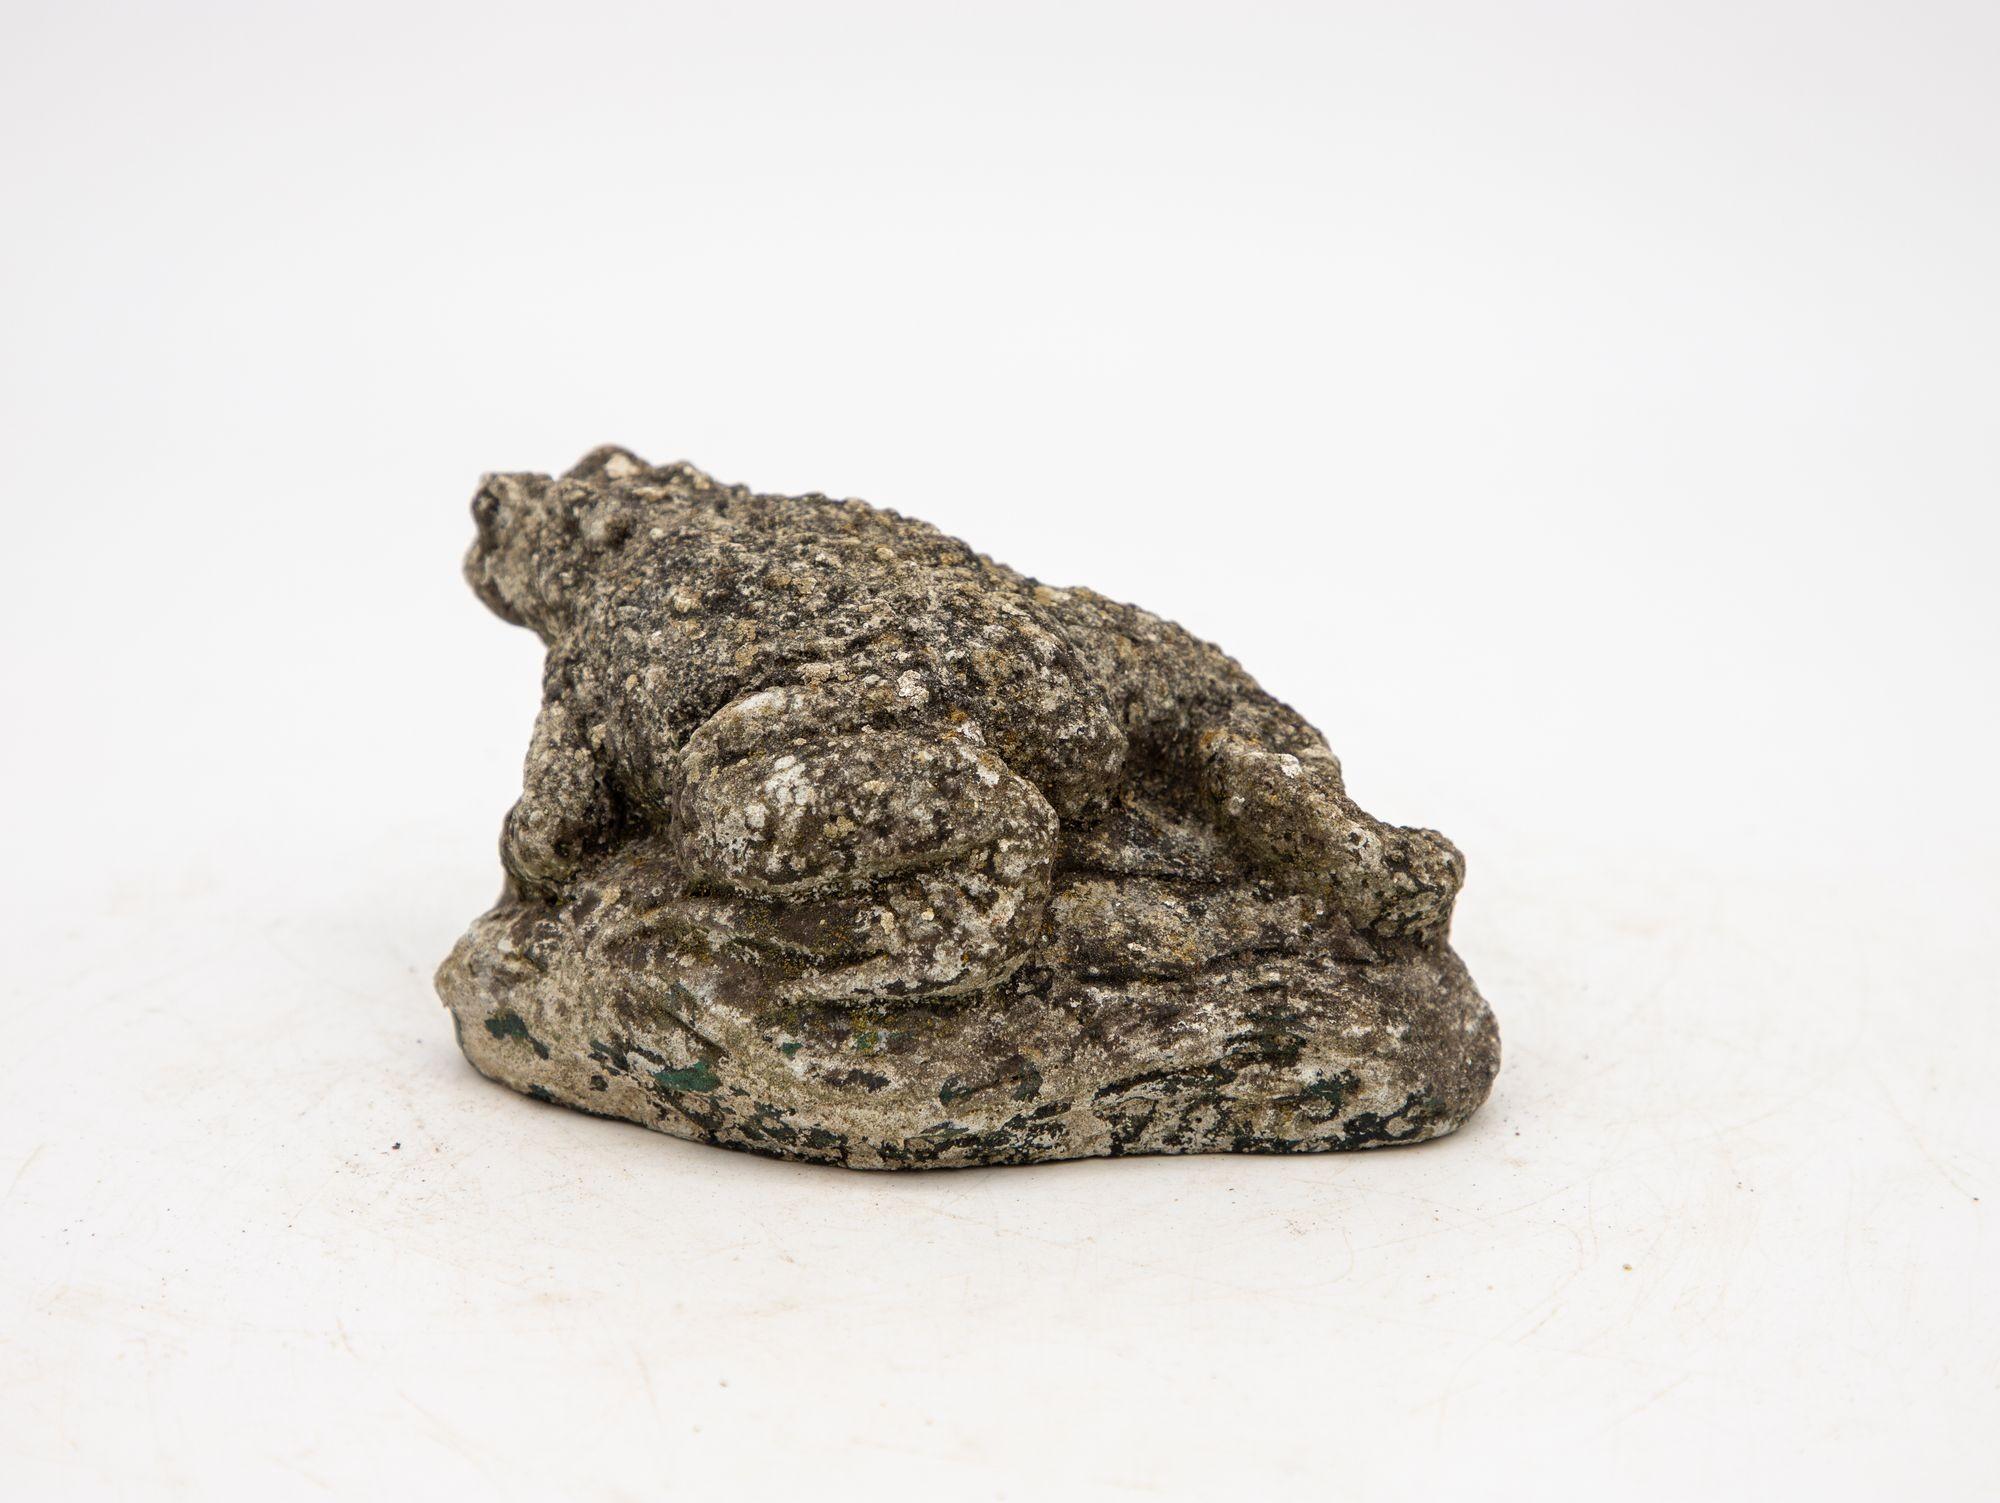 This delightful reconstituted stone frog garden ornament brings a touch of whimsy and charm to your outdoor space. This ornament features an honest patina, giving it an authentic and aged appearance, and is covered in natural moss that adds to its